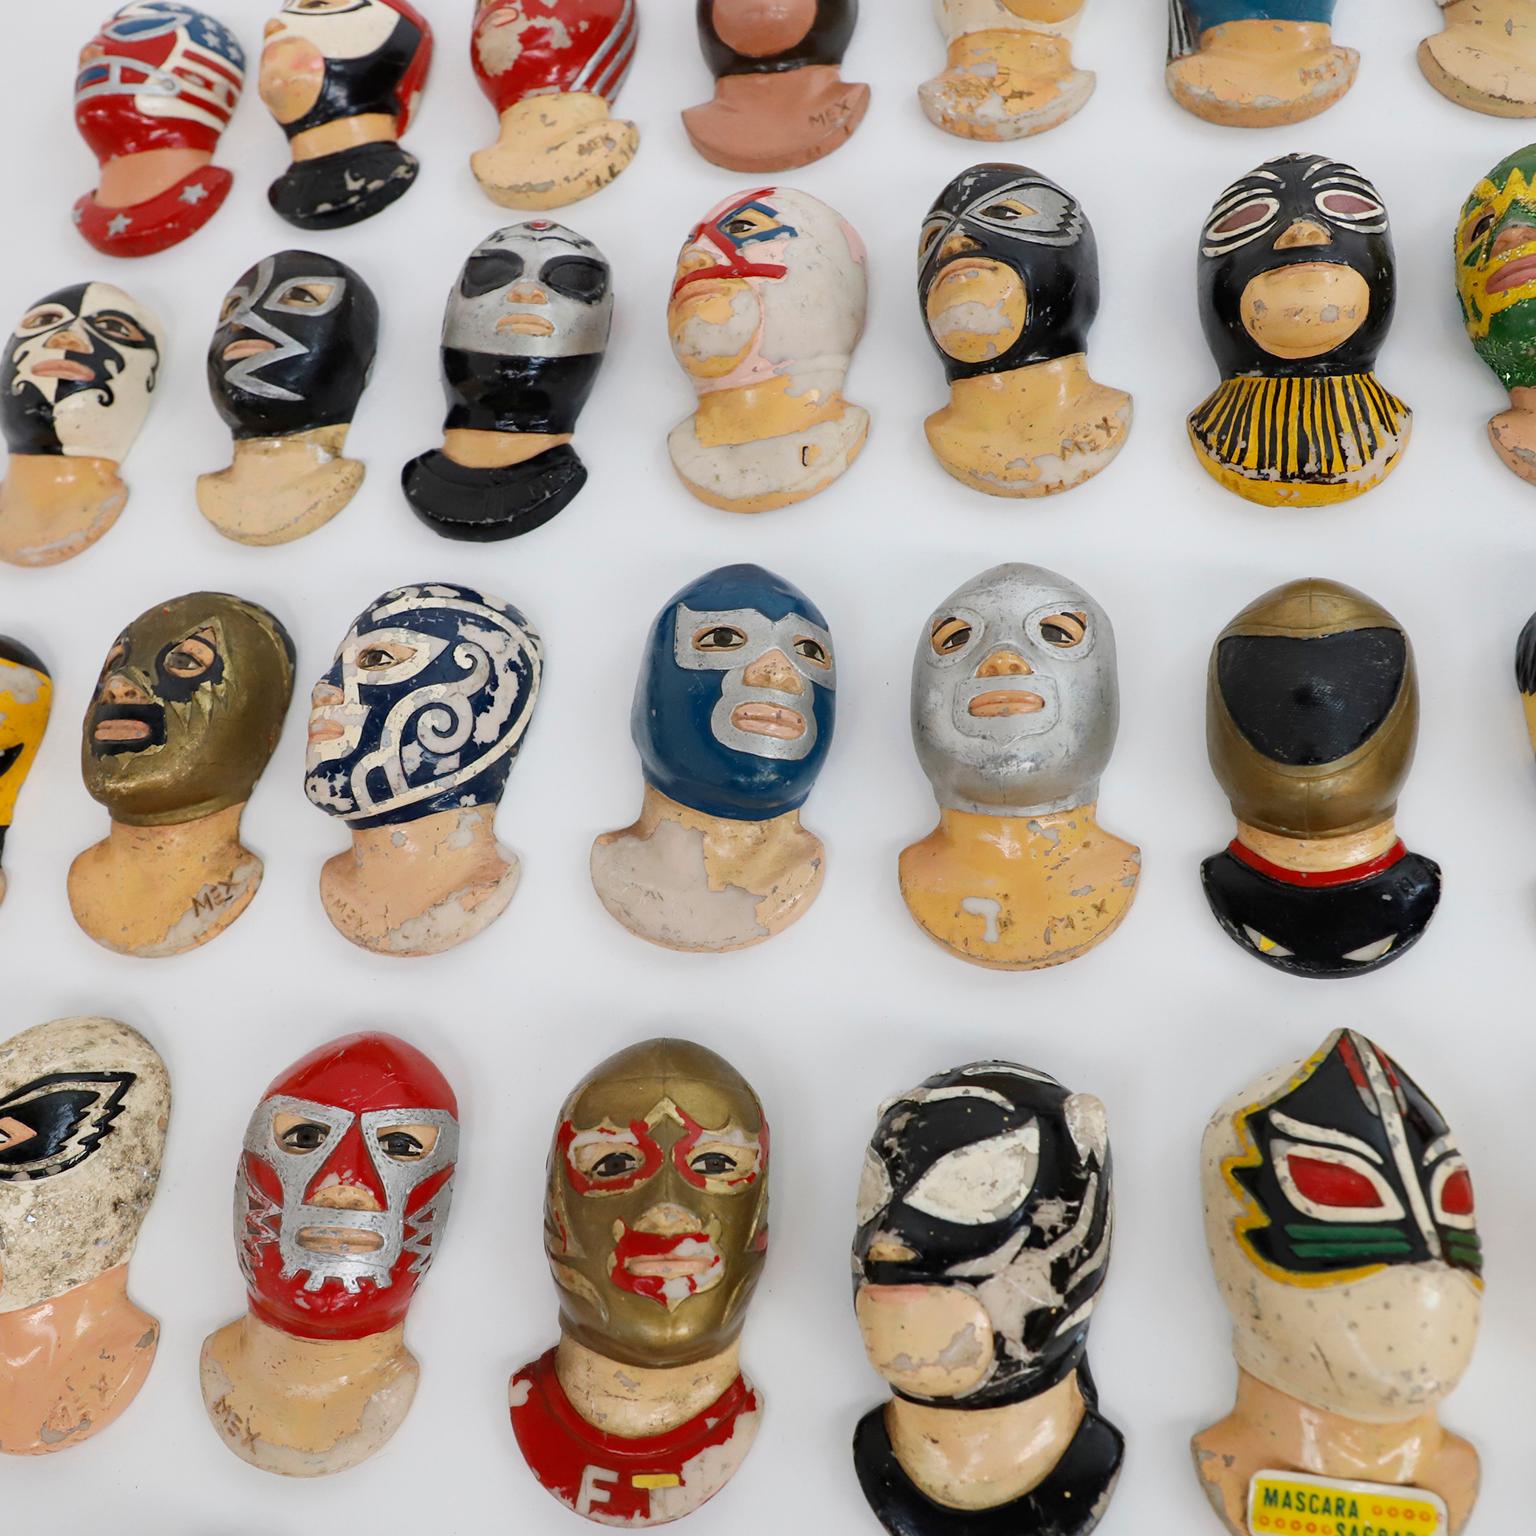 We offer this fantastic set of 38 of the most iconic Mexican wrestling fighters, made in recine and hand painted includes El Santo, Blue Demon, Rayo de Jalisco, Mil Mascaras, Tinieblas, Octagon, Atlantis, Supermuñeco, mascara sagrada, matemático